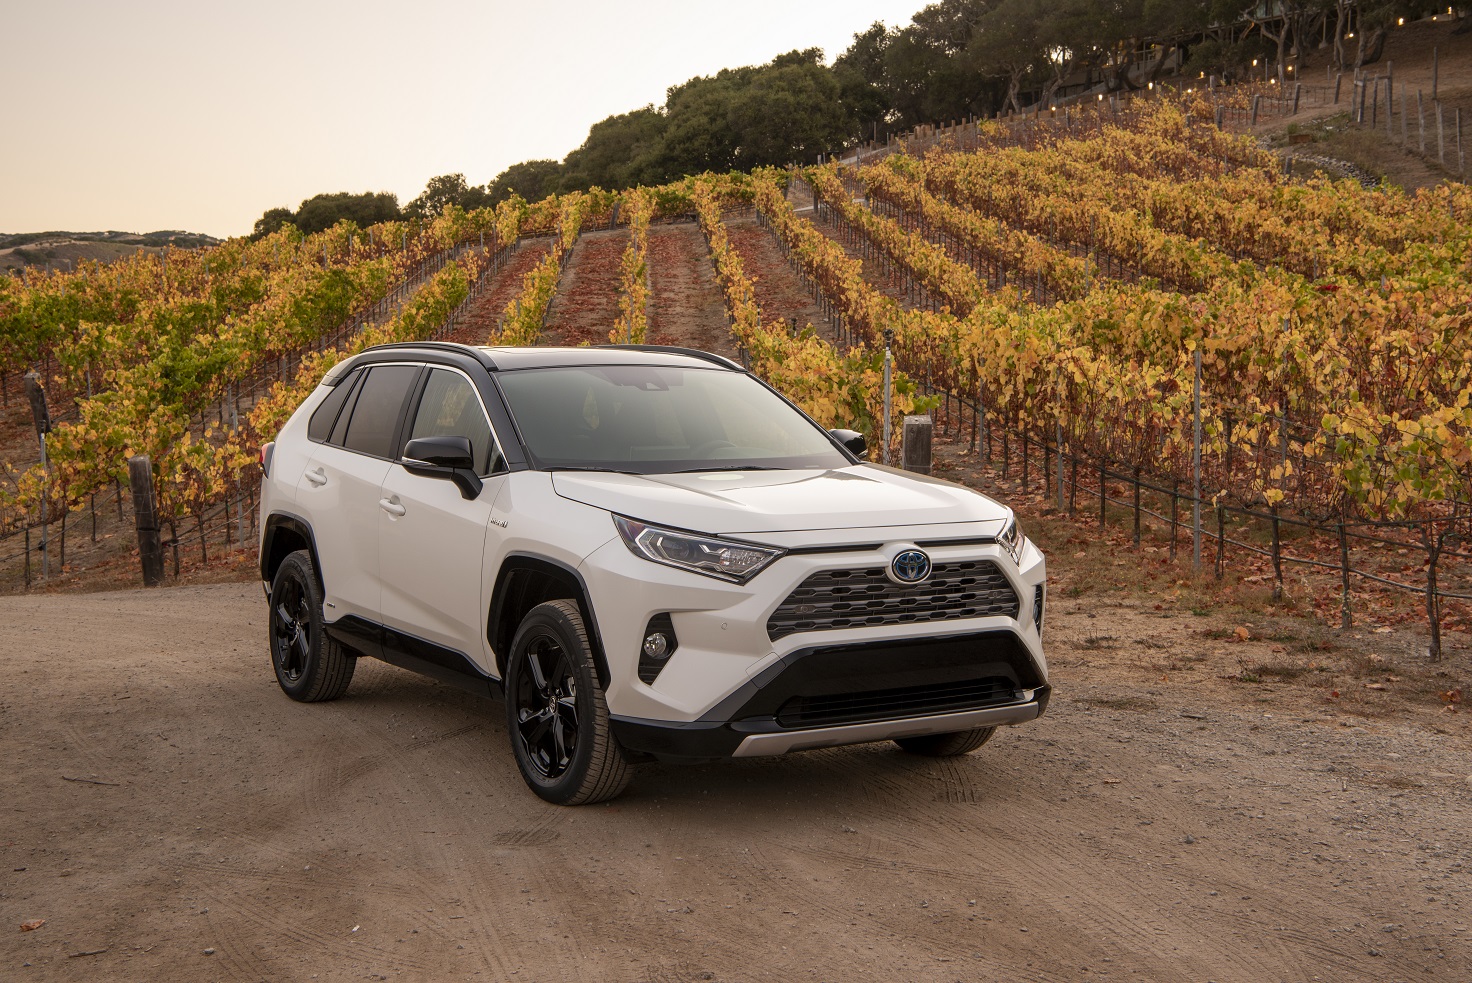 Electrify Your Life With The All-New 2019 Toyota RAV4 Hybrid – the advanced  compact SUV at an attractive price